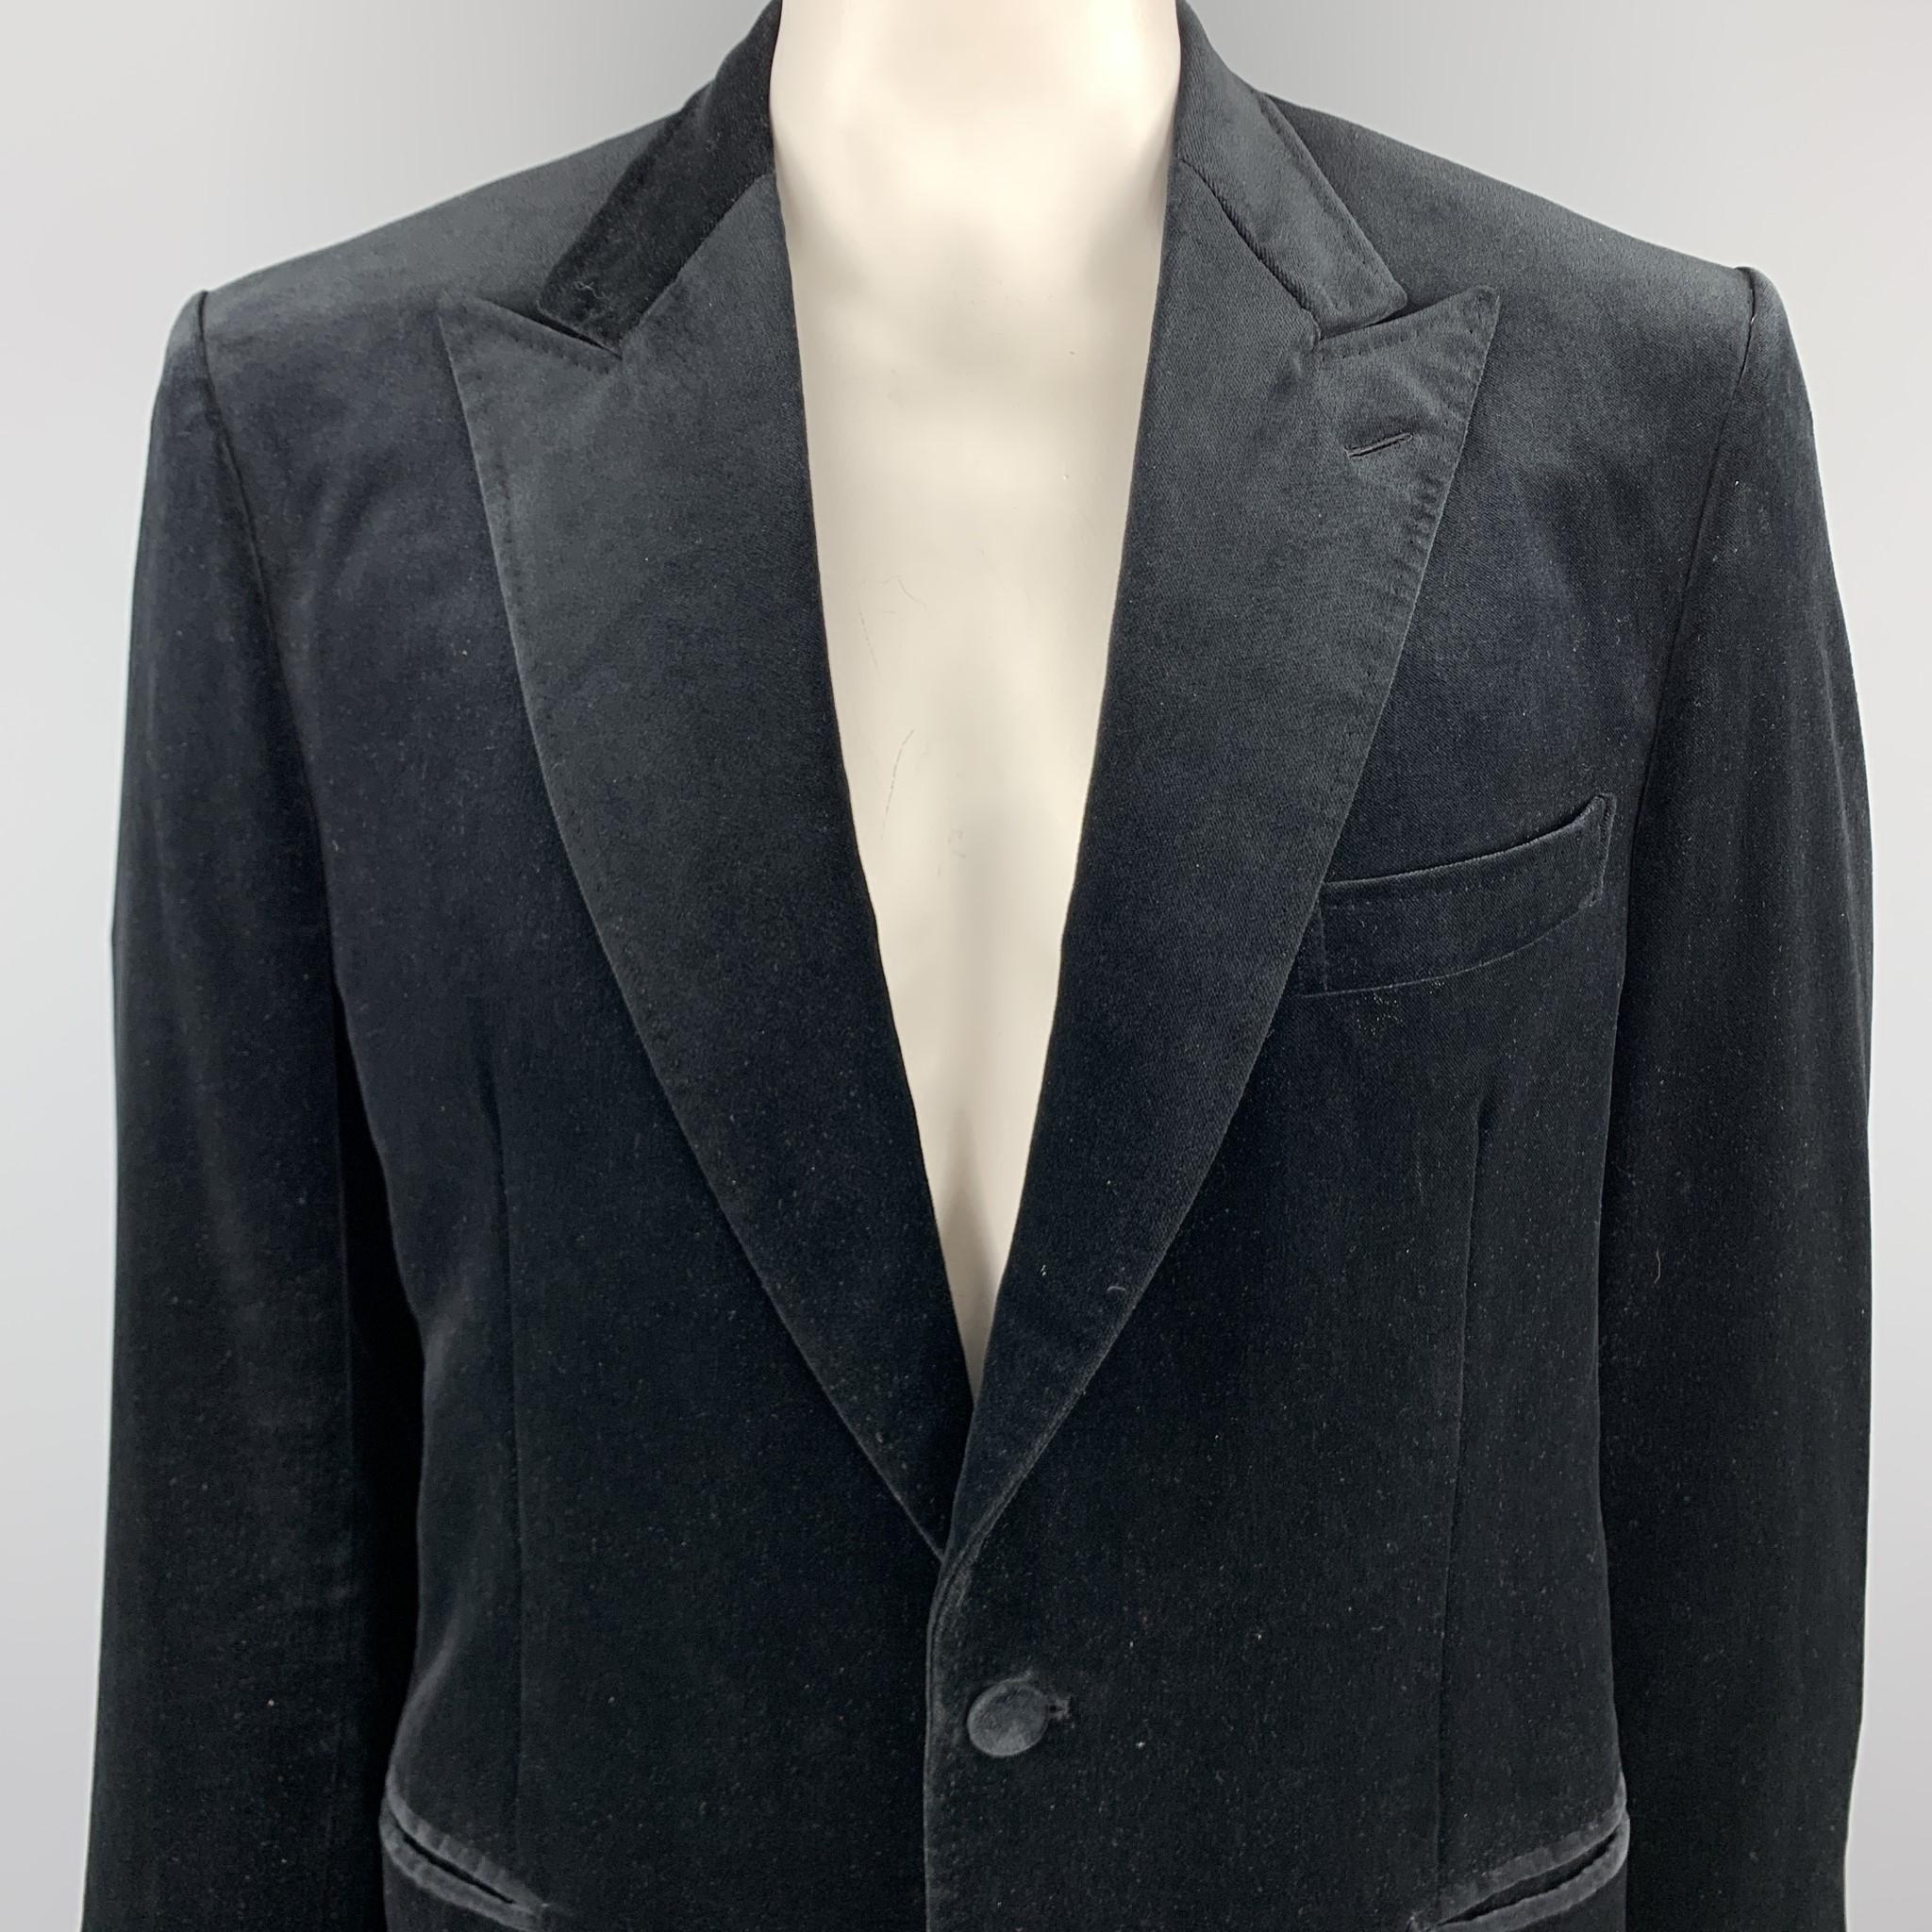 BRIONI sport coat comes in a black velvet featuring a peak lapel, slit pockets, and a single button closure. Made in Italy.

Excellent Pre-Owned Condition.
Marked: No Size Marked

Measurements:

Shoulder: 18 in. 
Chest: 42 in. 
Sleeve: 26